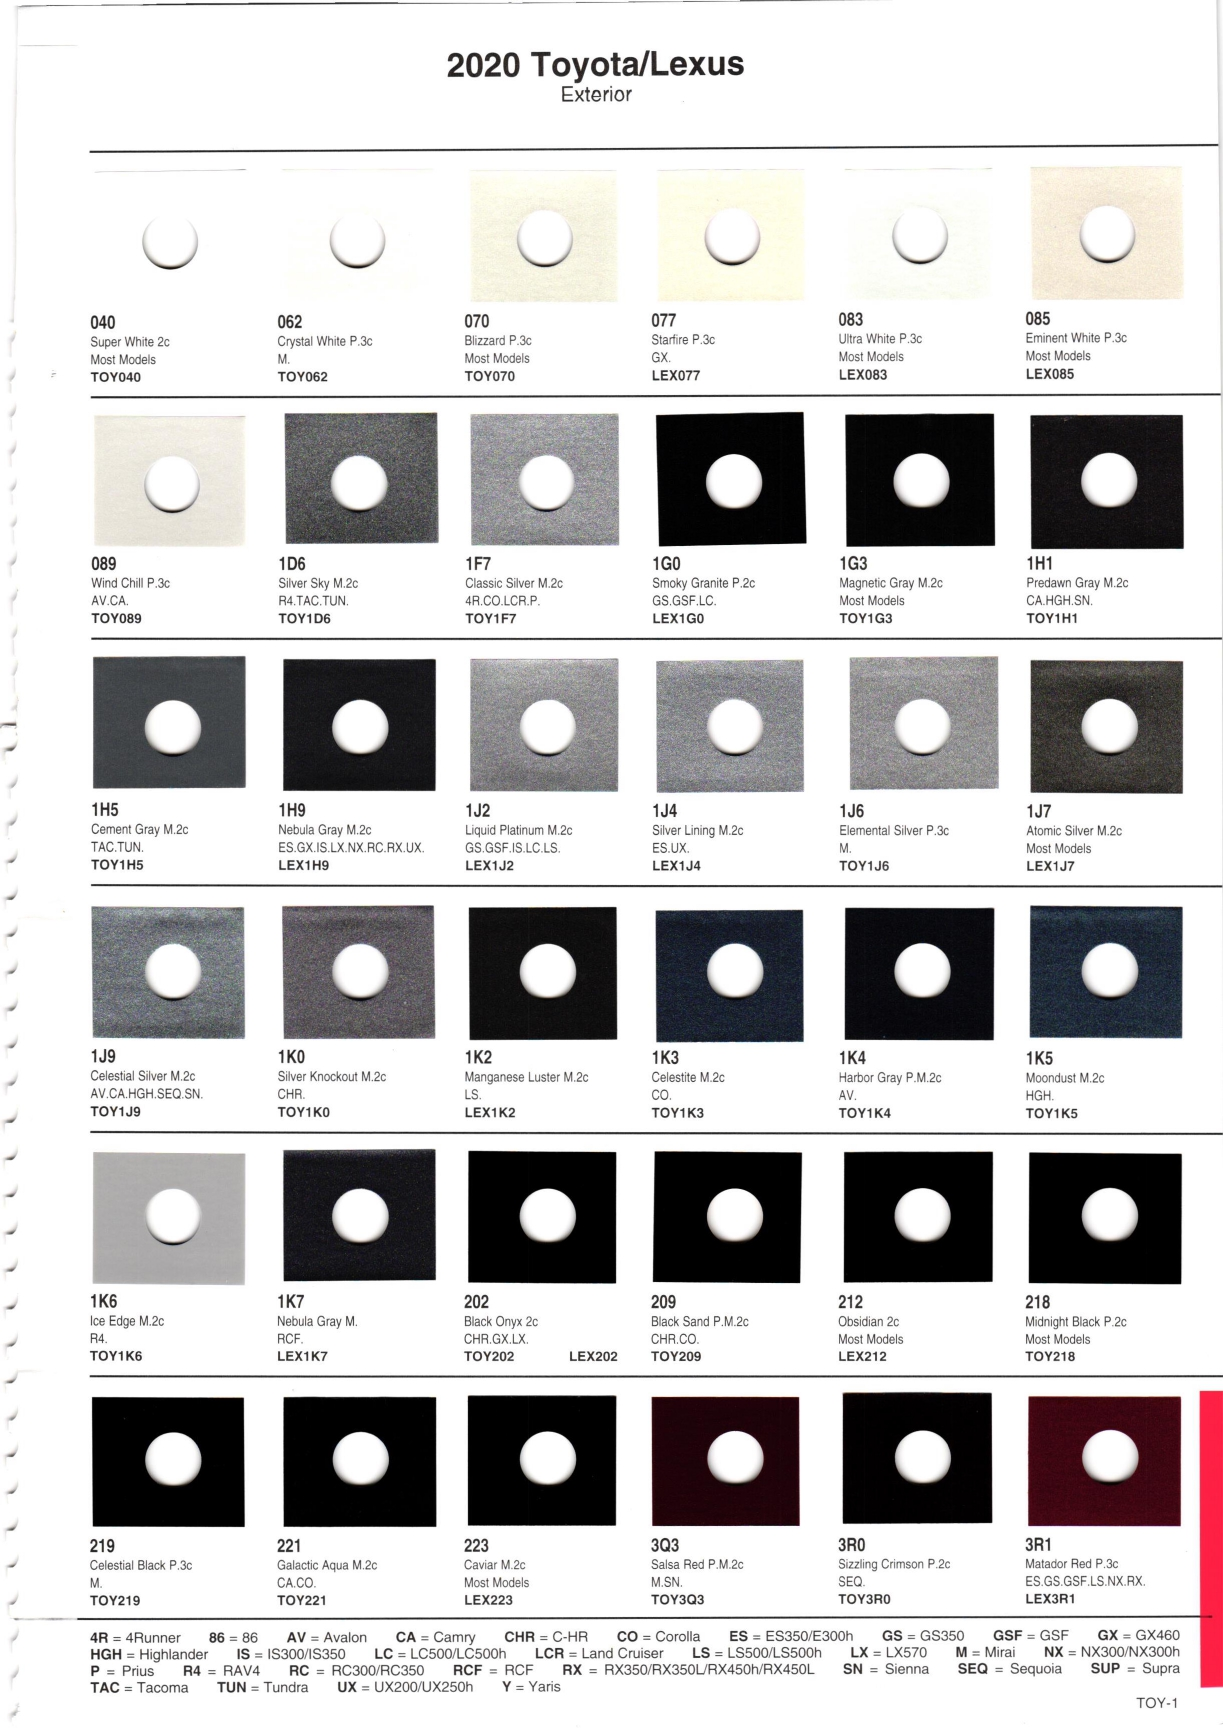 Exterior Colors/paint chips/paint codes used on Toyota and Lexus vehicles in 2020